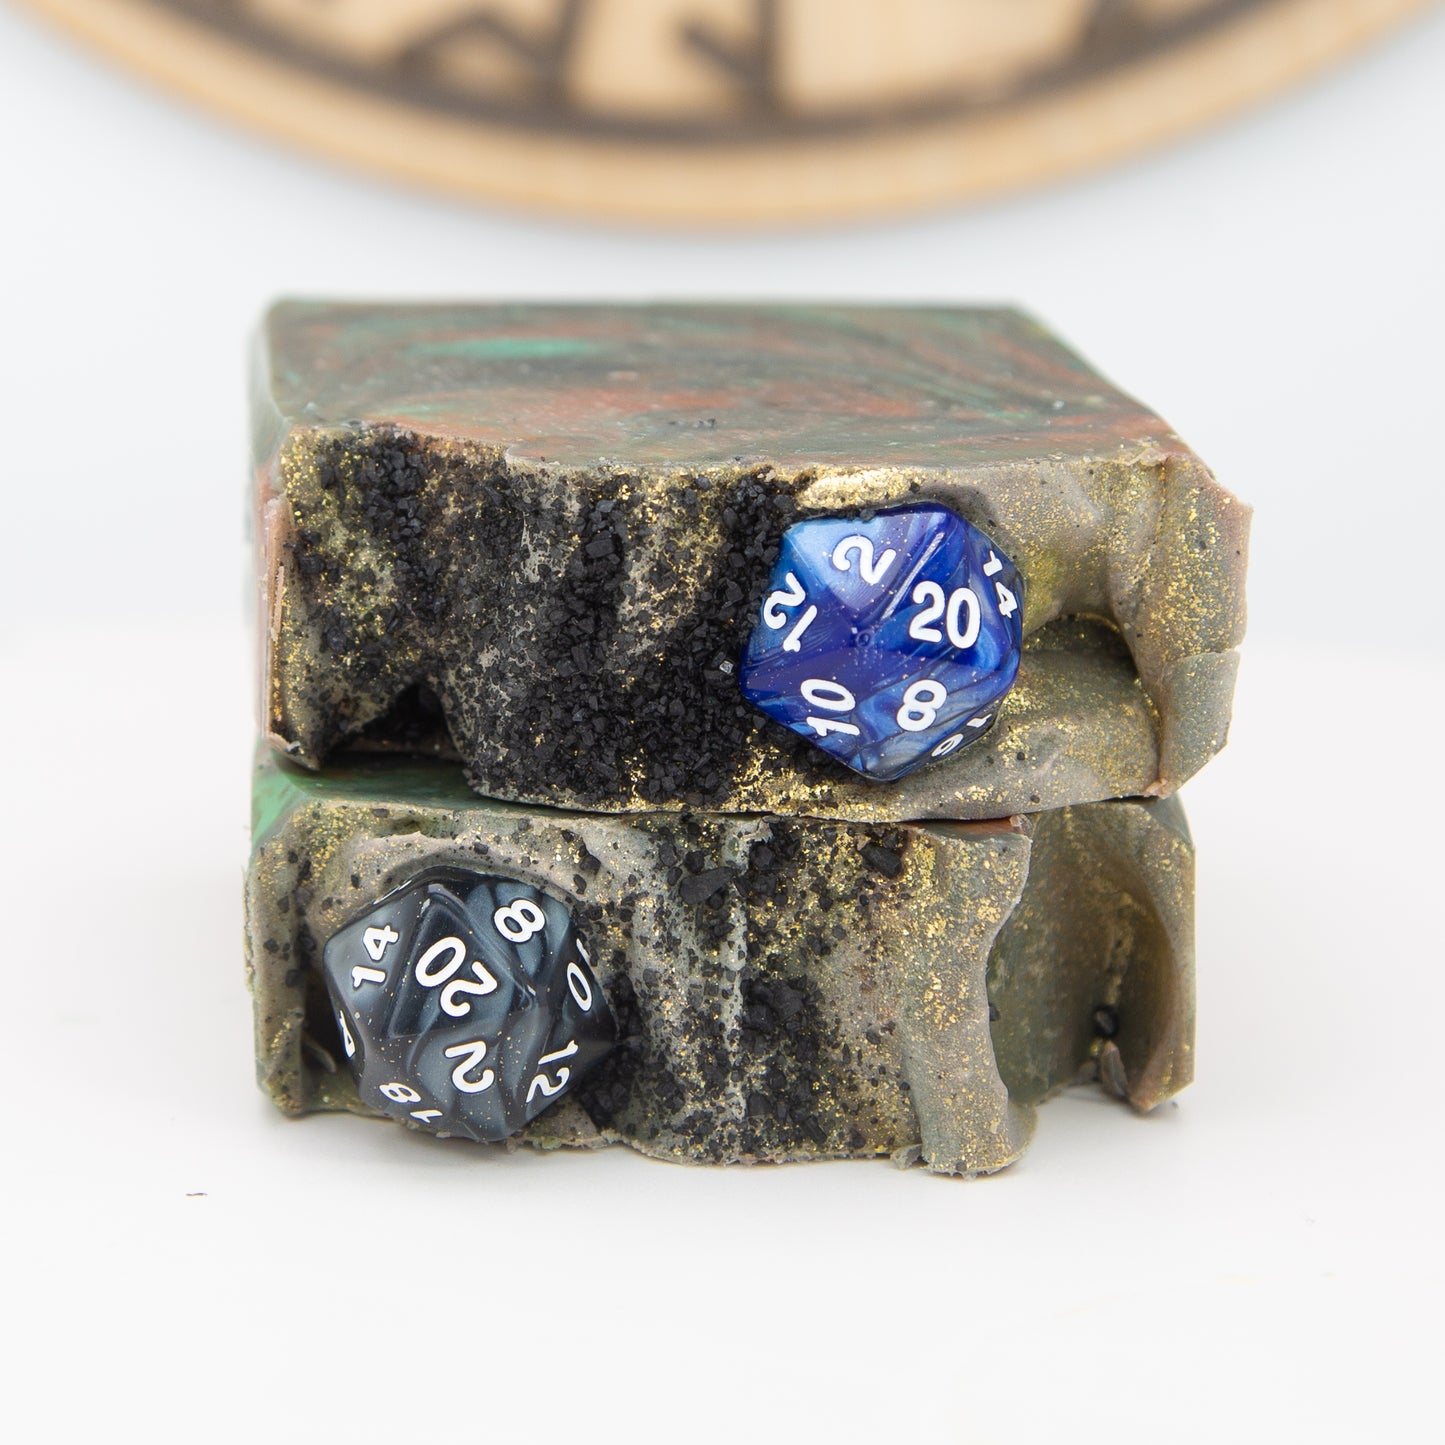 You Mead at a Tavern Dungeons and Dragons Soap, Birds of Valhalla, , Birds of Valhalla